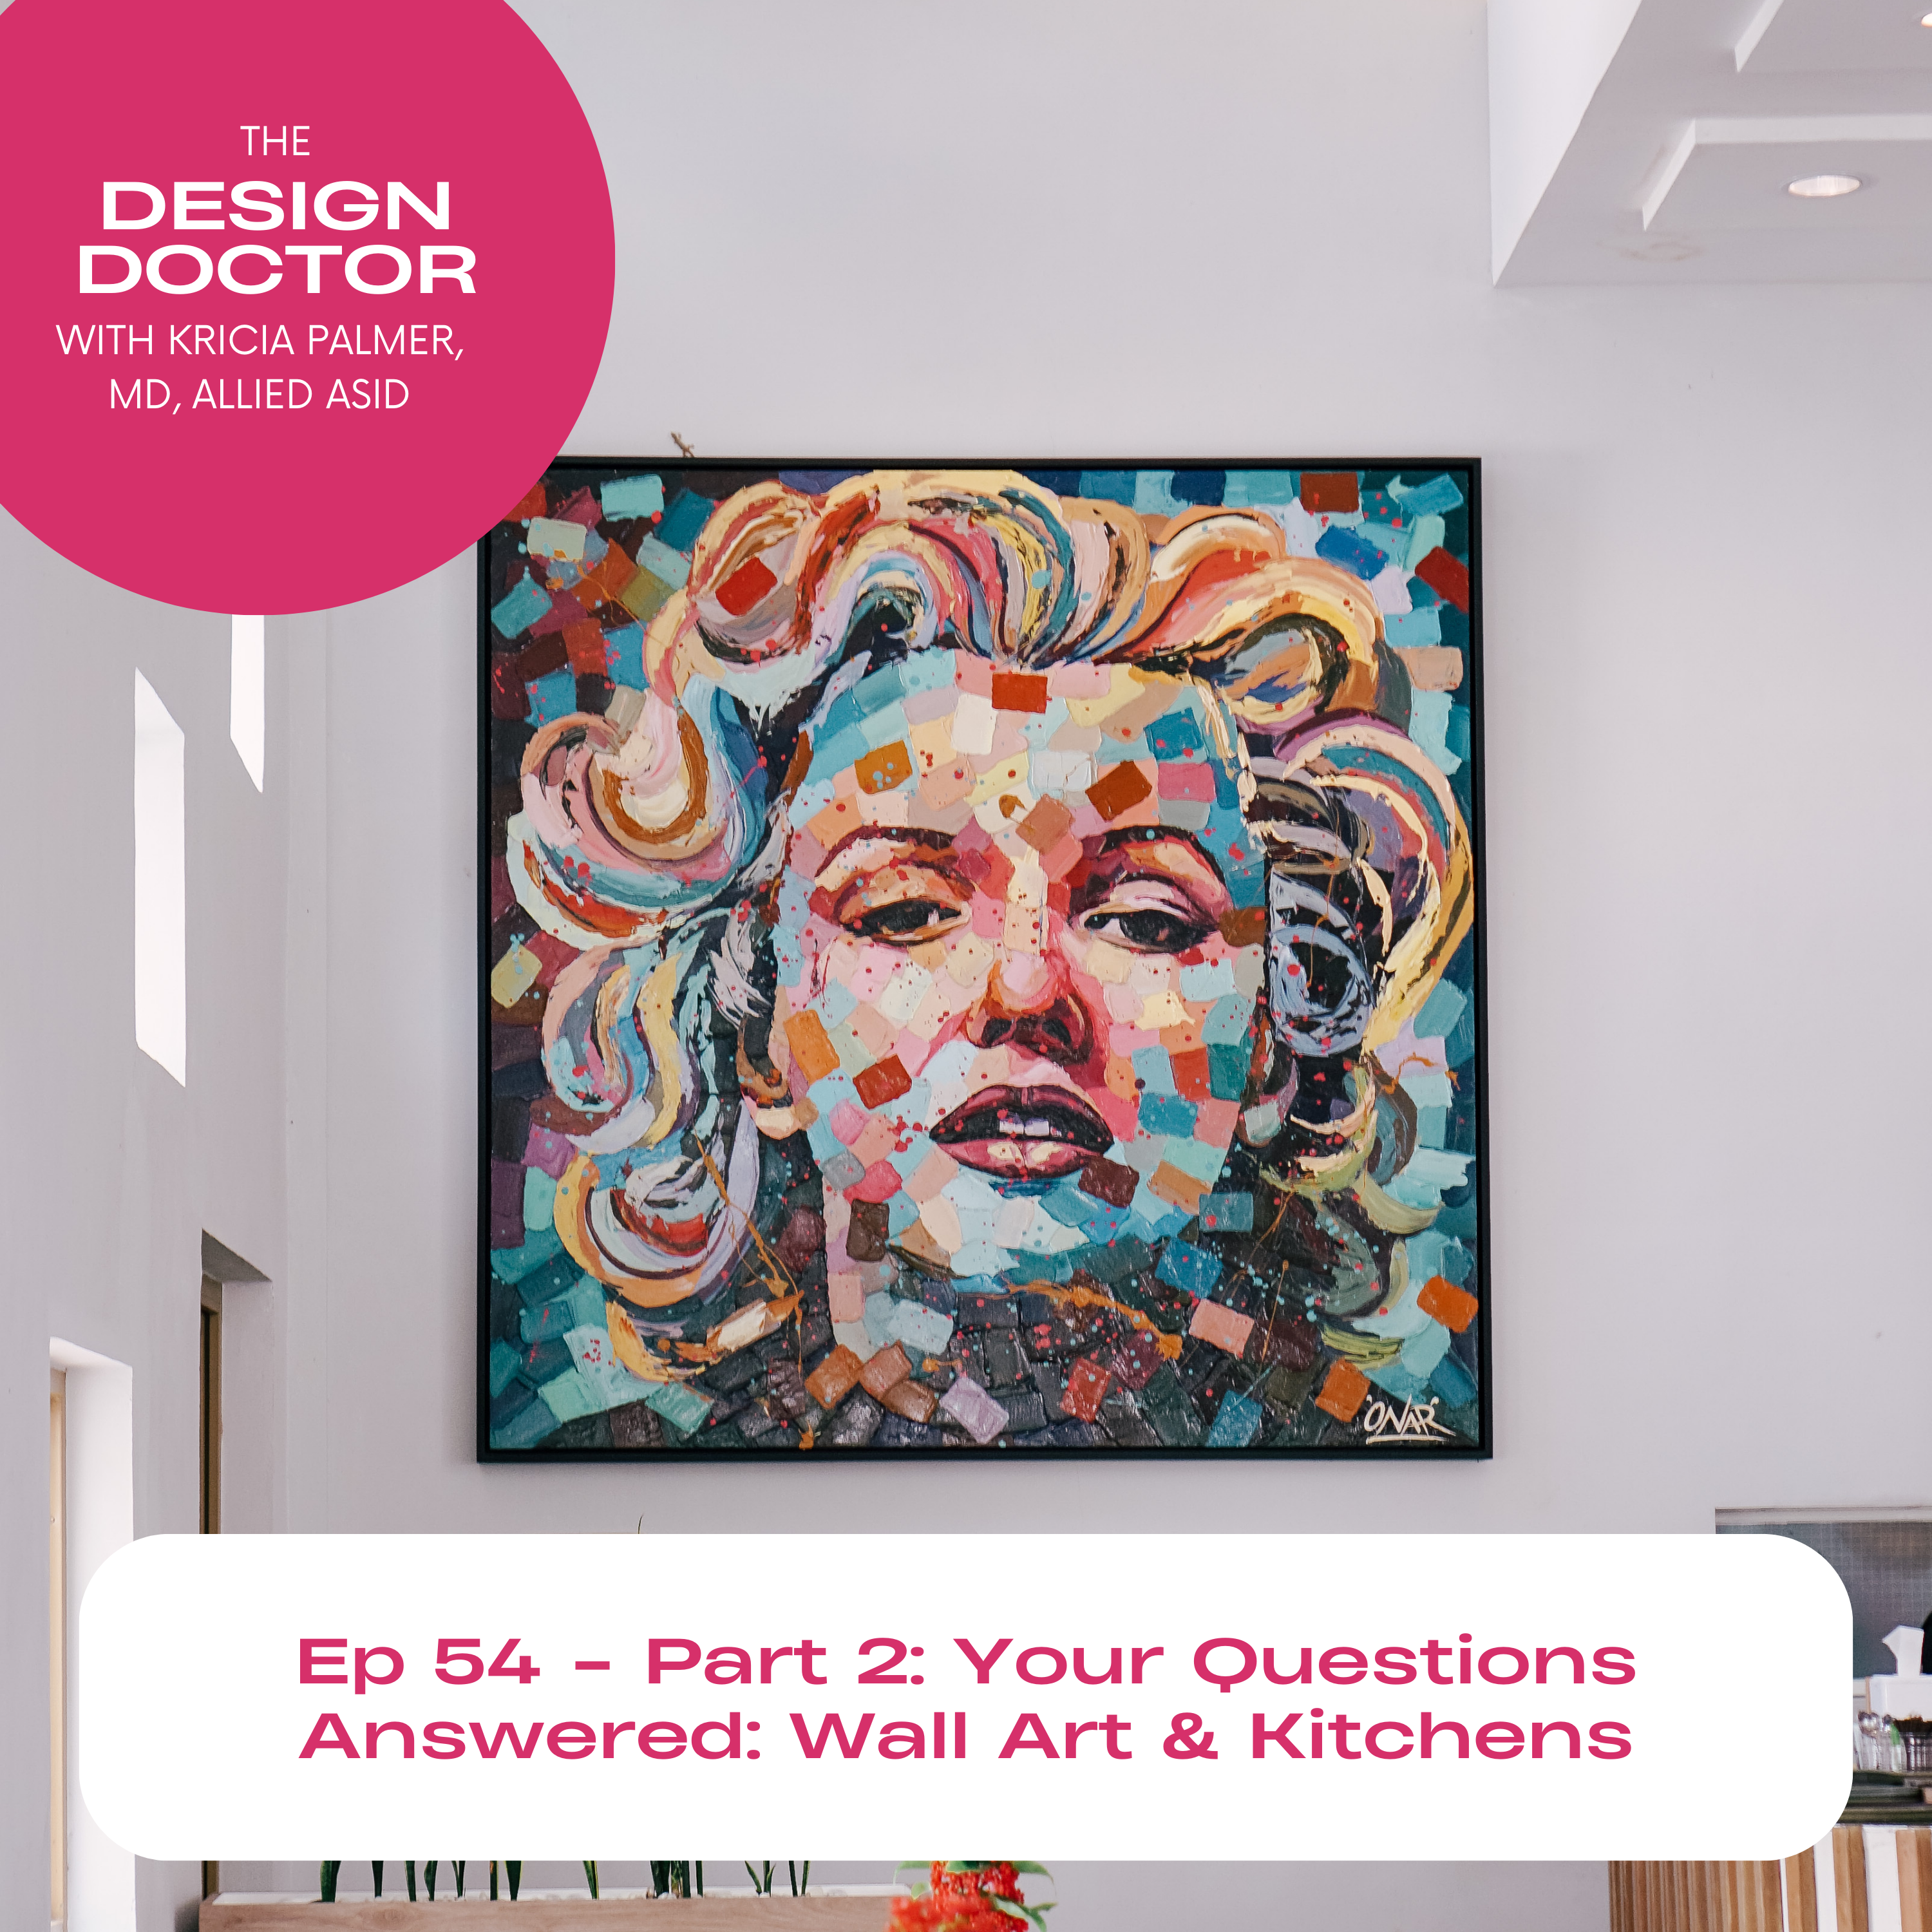 Episode 54 Part 2 Your Questions Answered Wall Art & Kitchens